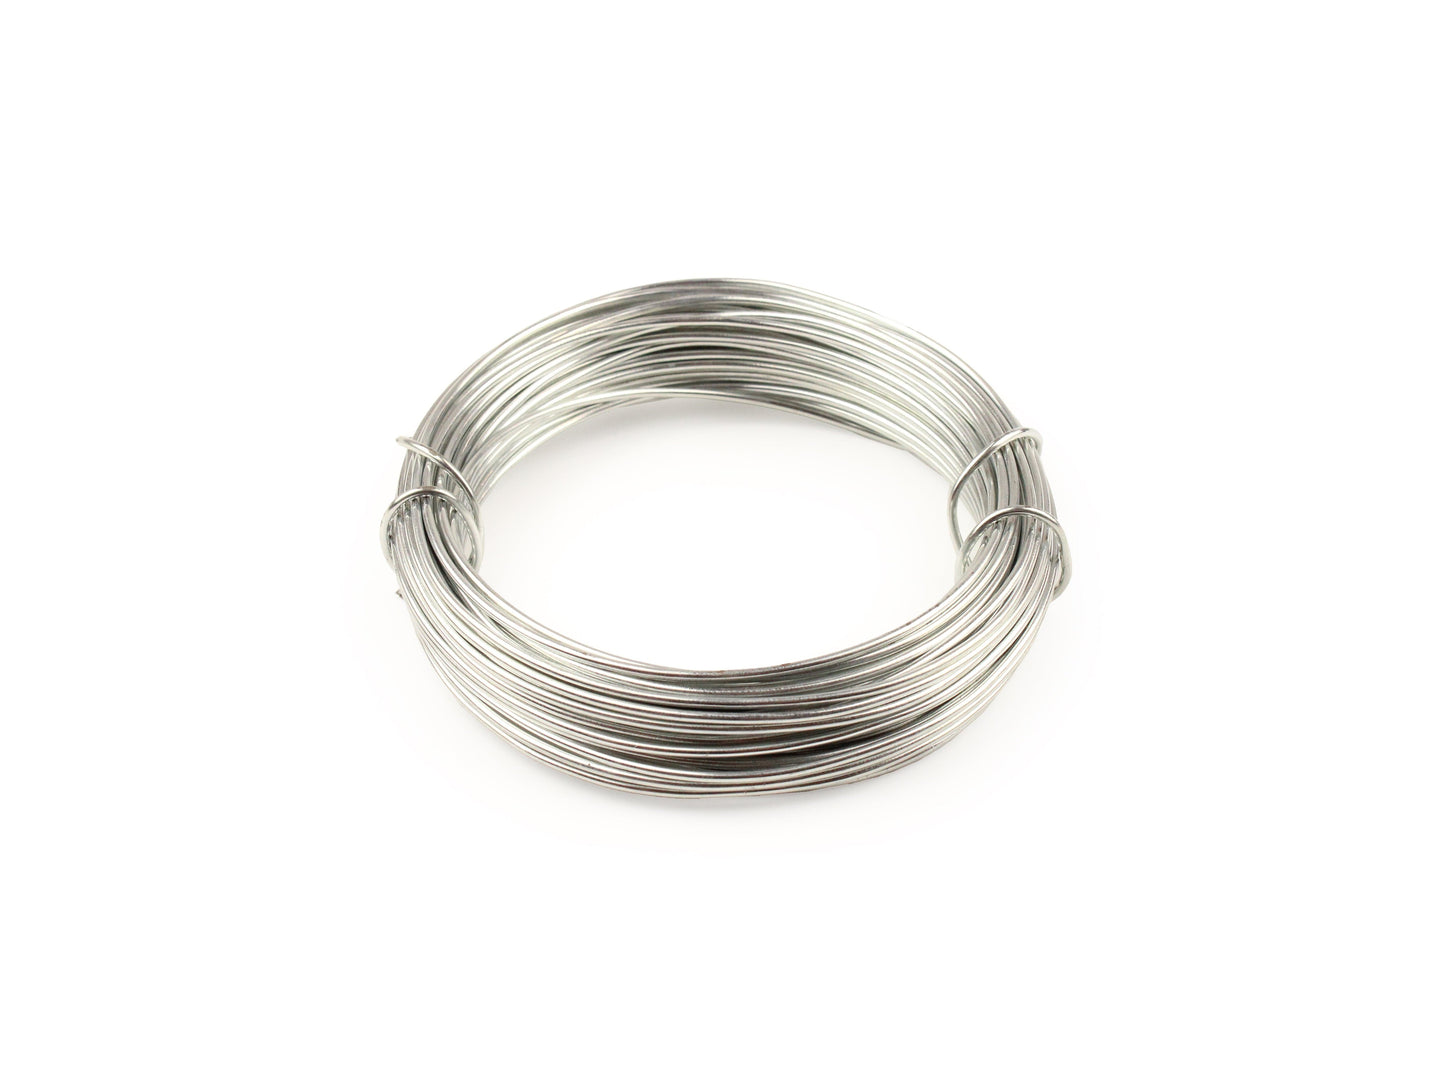 Galvanised wire in various sizes - The Makerss